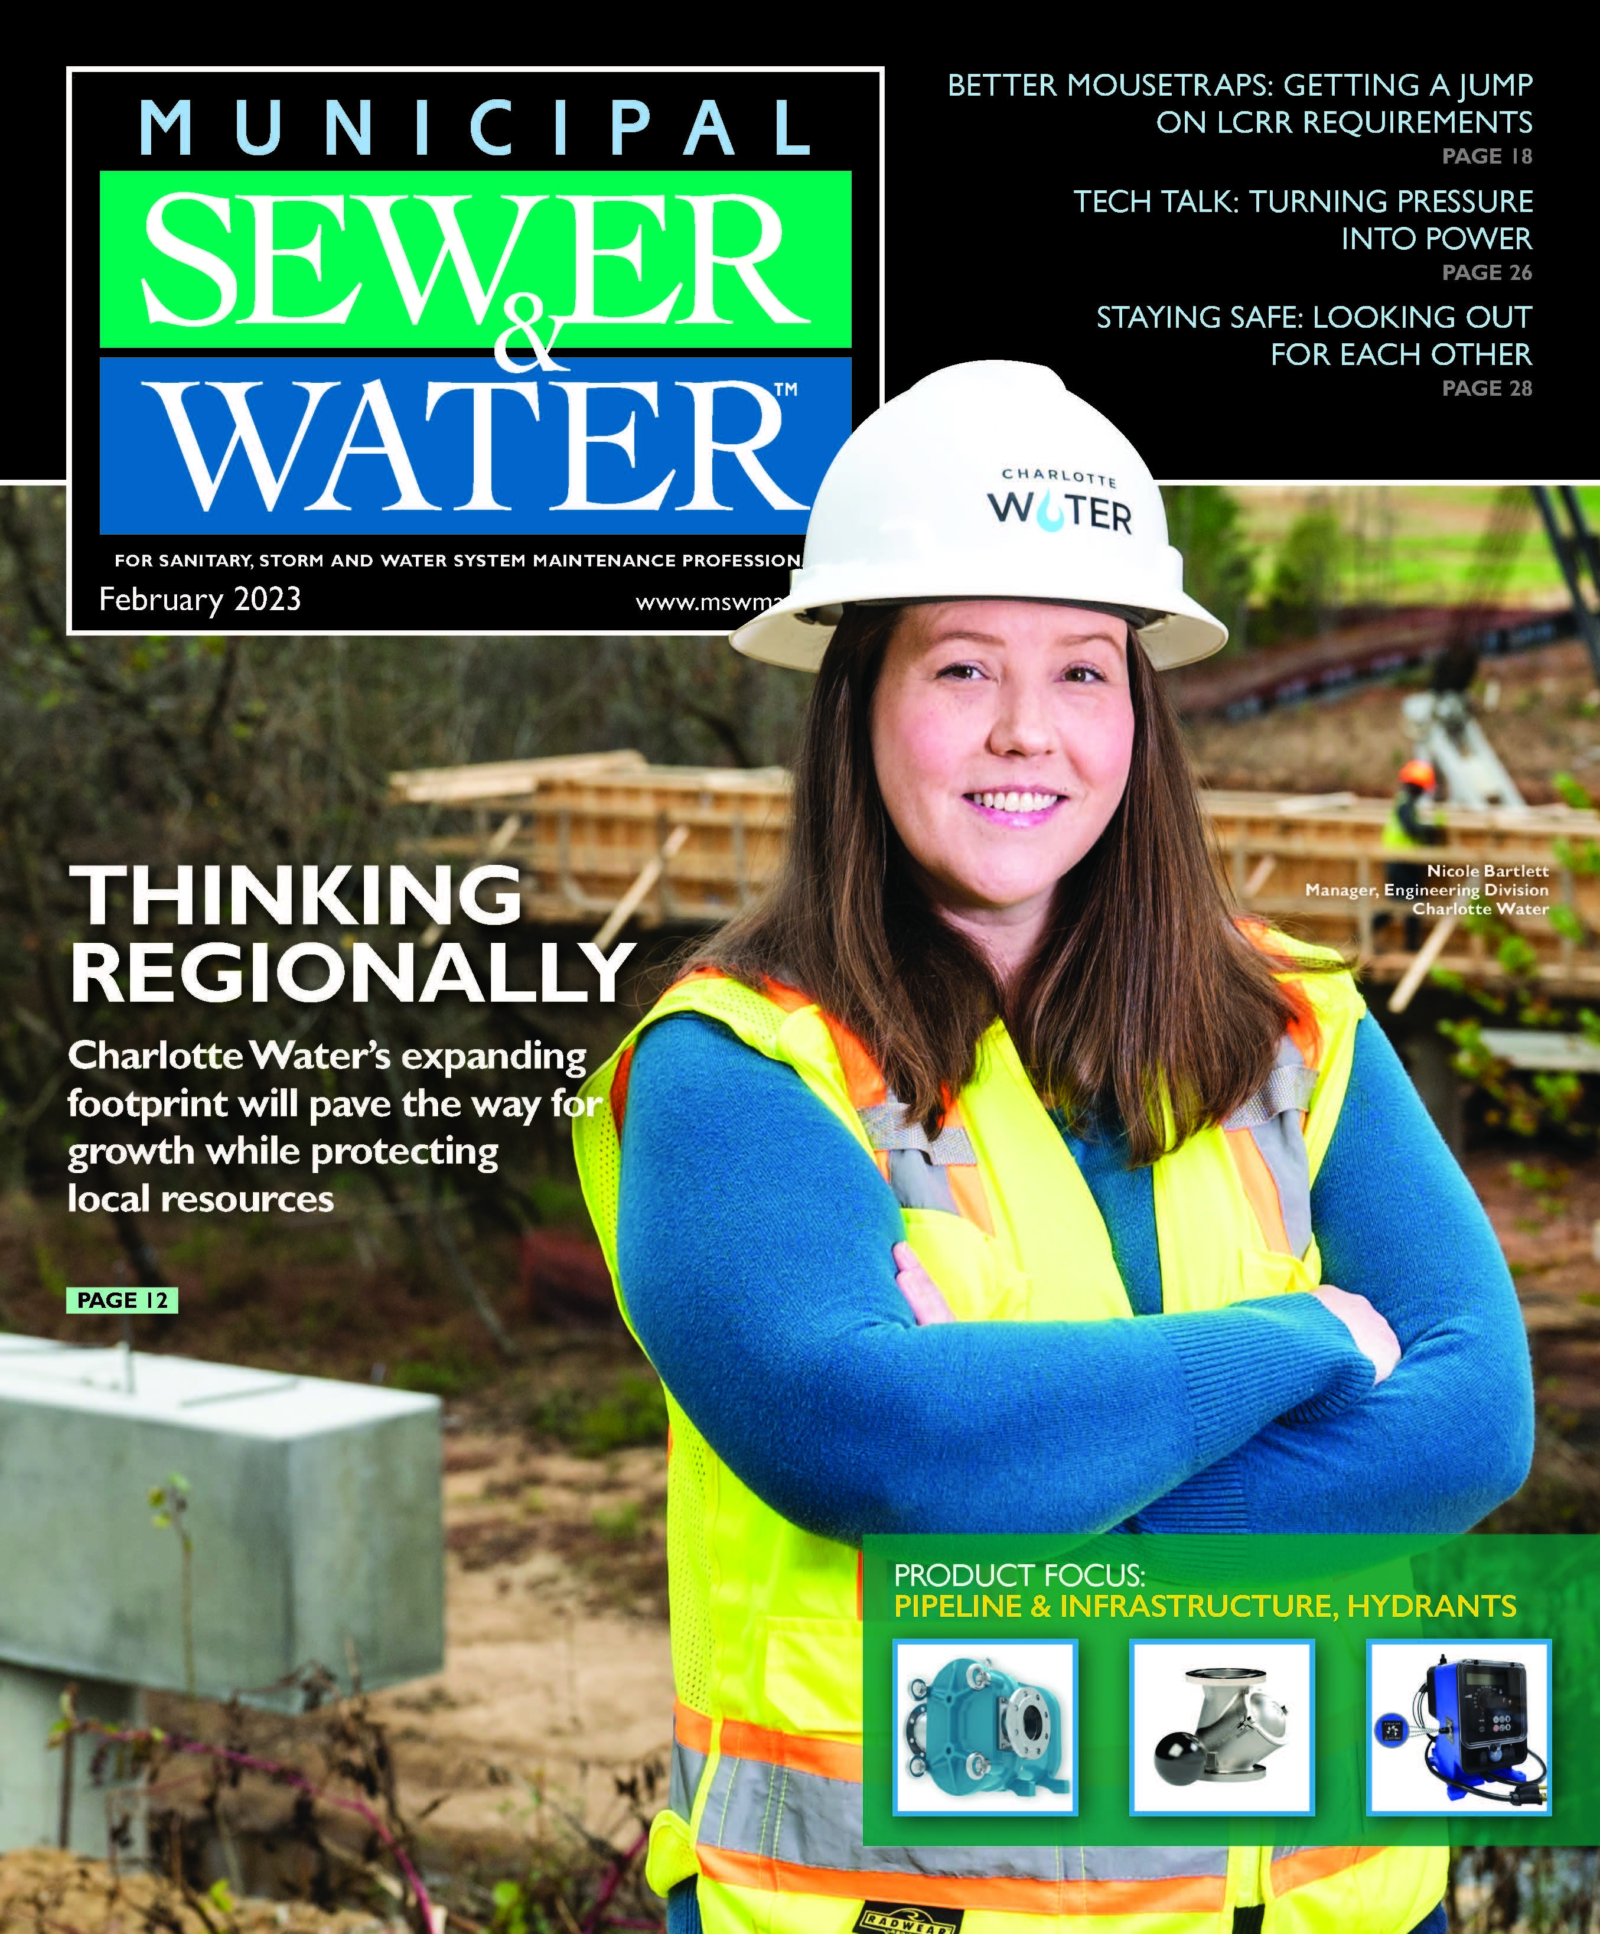 Municipal Sewer and Water Magazine cover. Thinking Regionally Charlotte Water’s expanding footprint will pave the way for growth while protecting local resources.